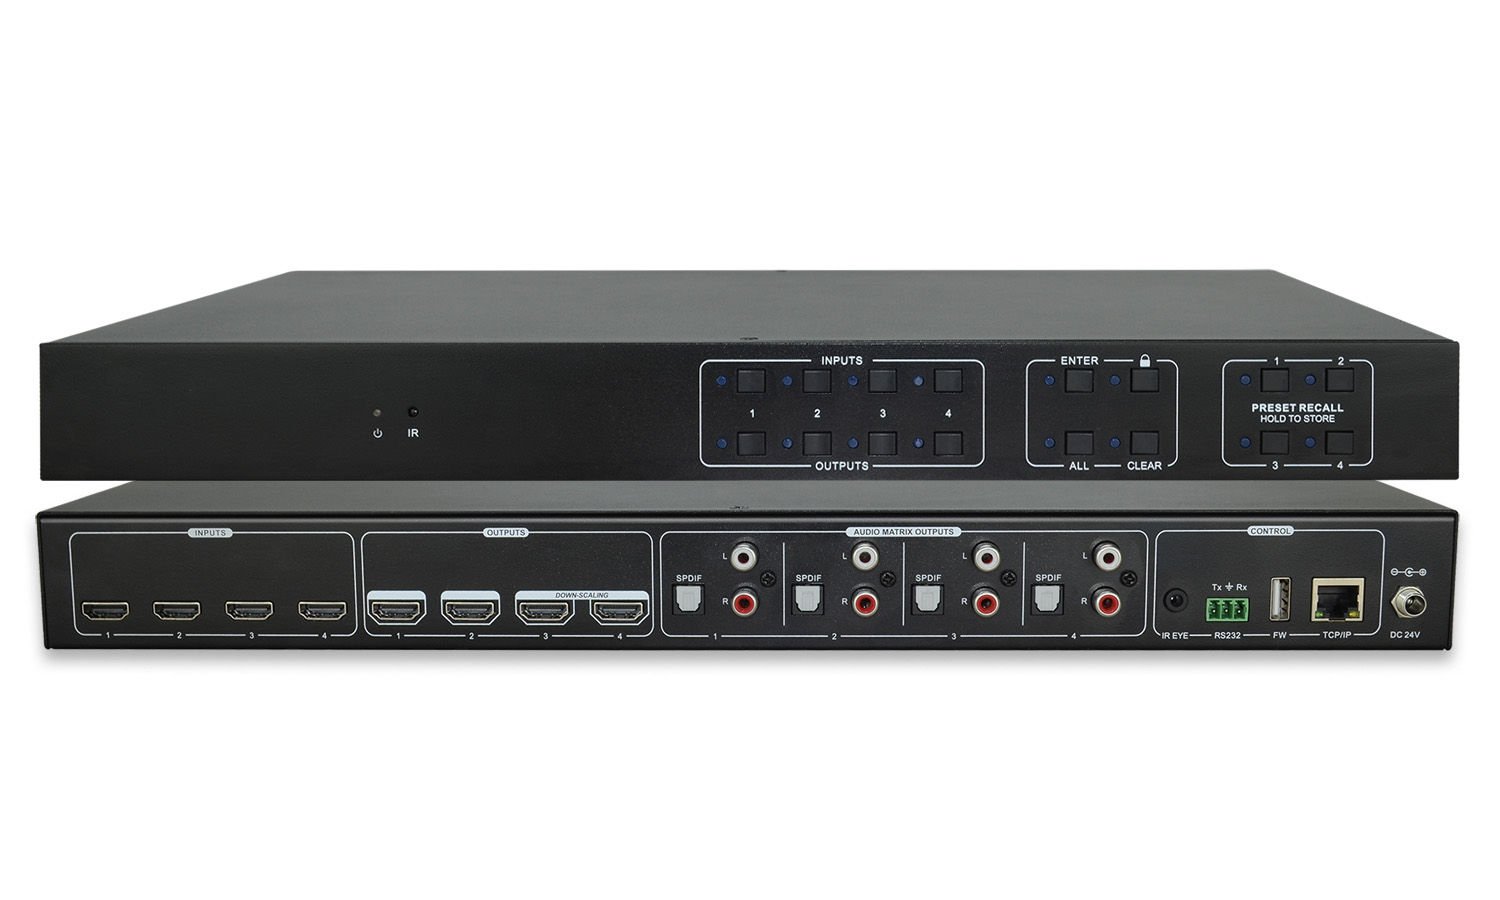 BG-UHD-44M18G 4X4 4K 60Hz 18Gbps HDMI and Audio Matrix Switcher with Downscaling/AOC Support by BZBGEAR